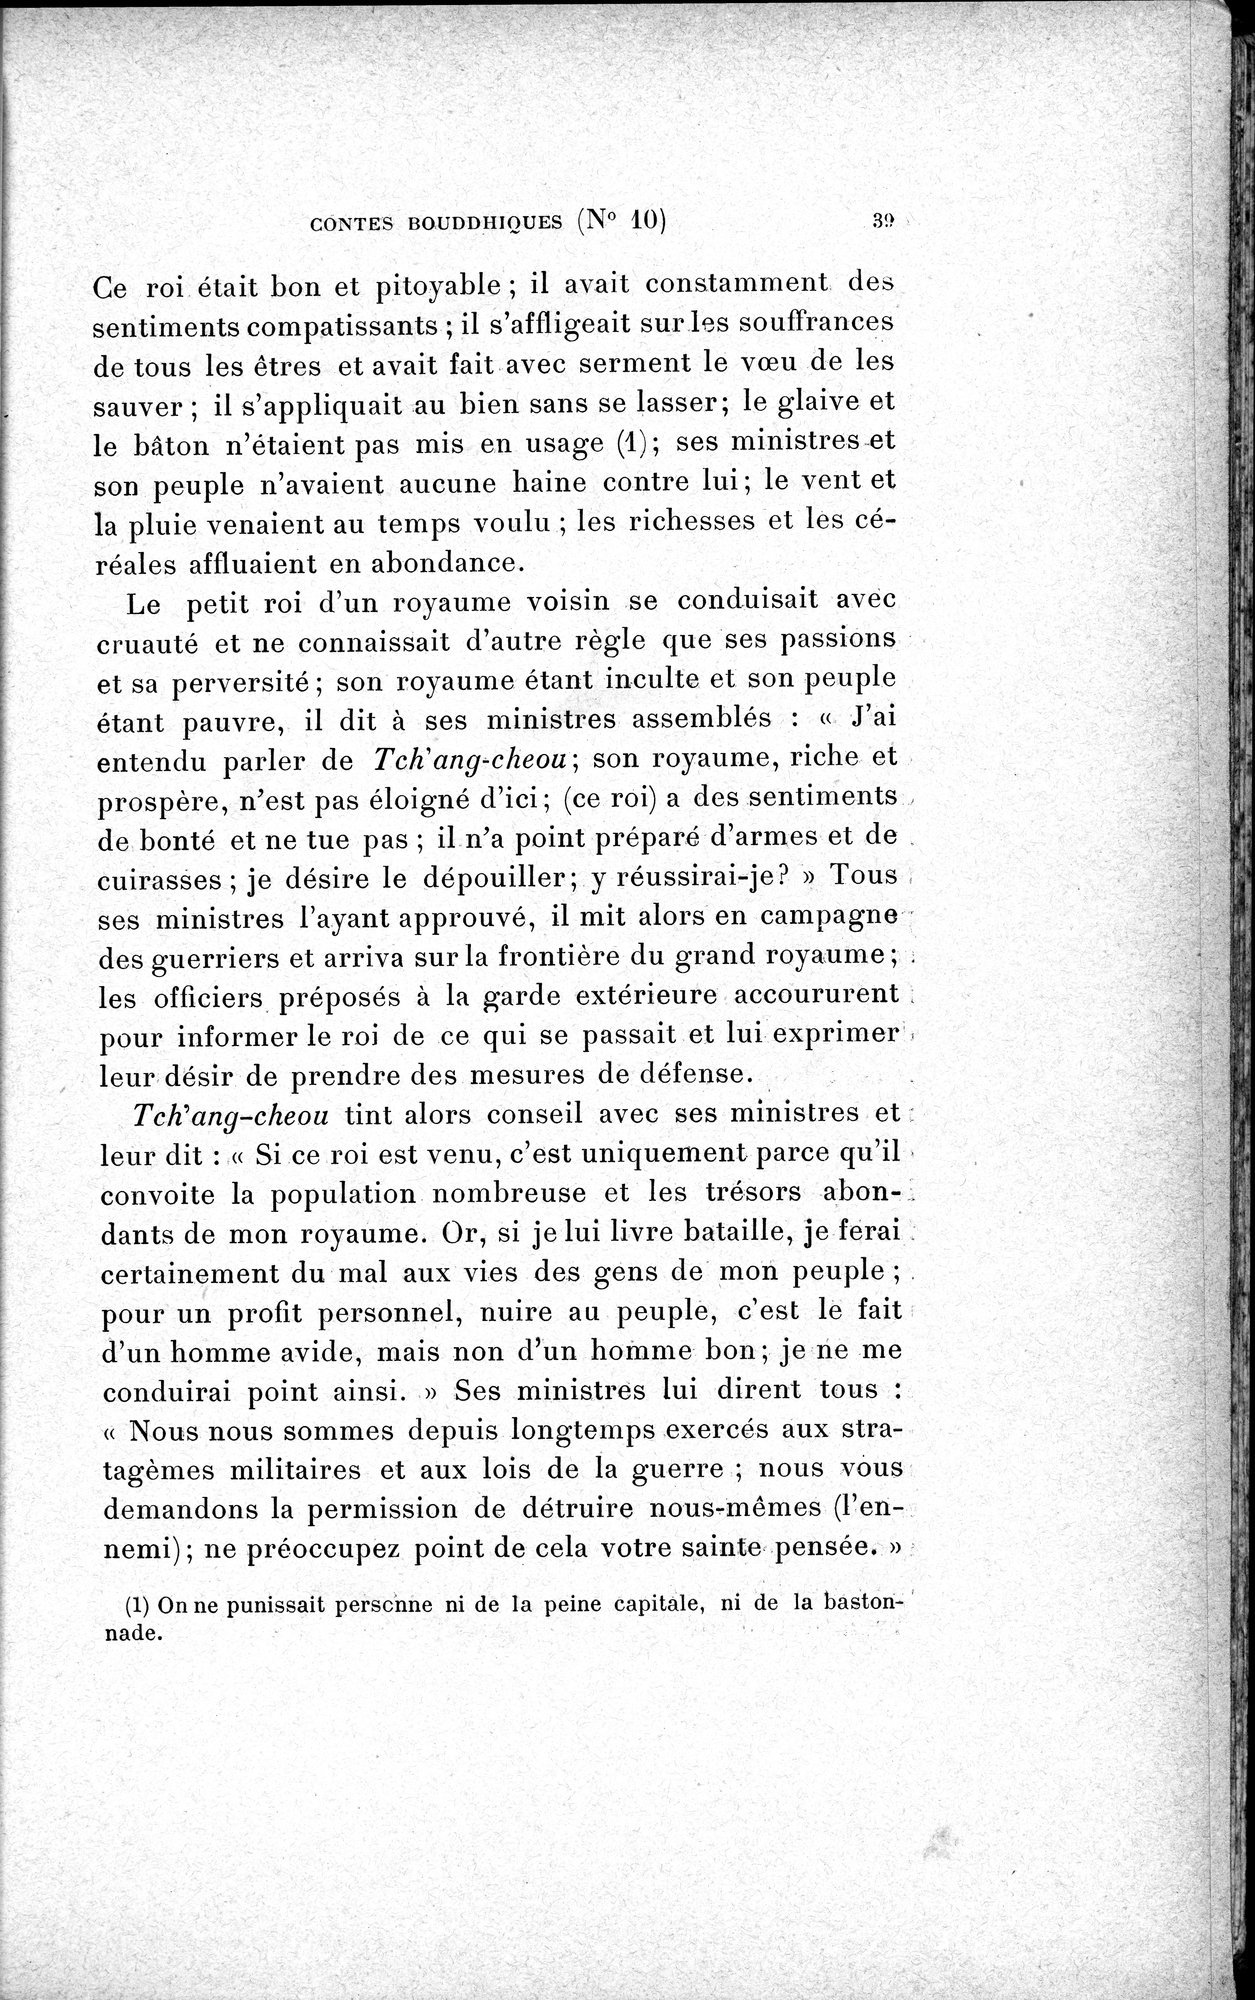 Cinq Cents Contes et Apologues : vol.1 / Page 73 (Grayscale High Resolution Image)